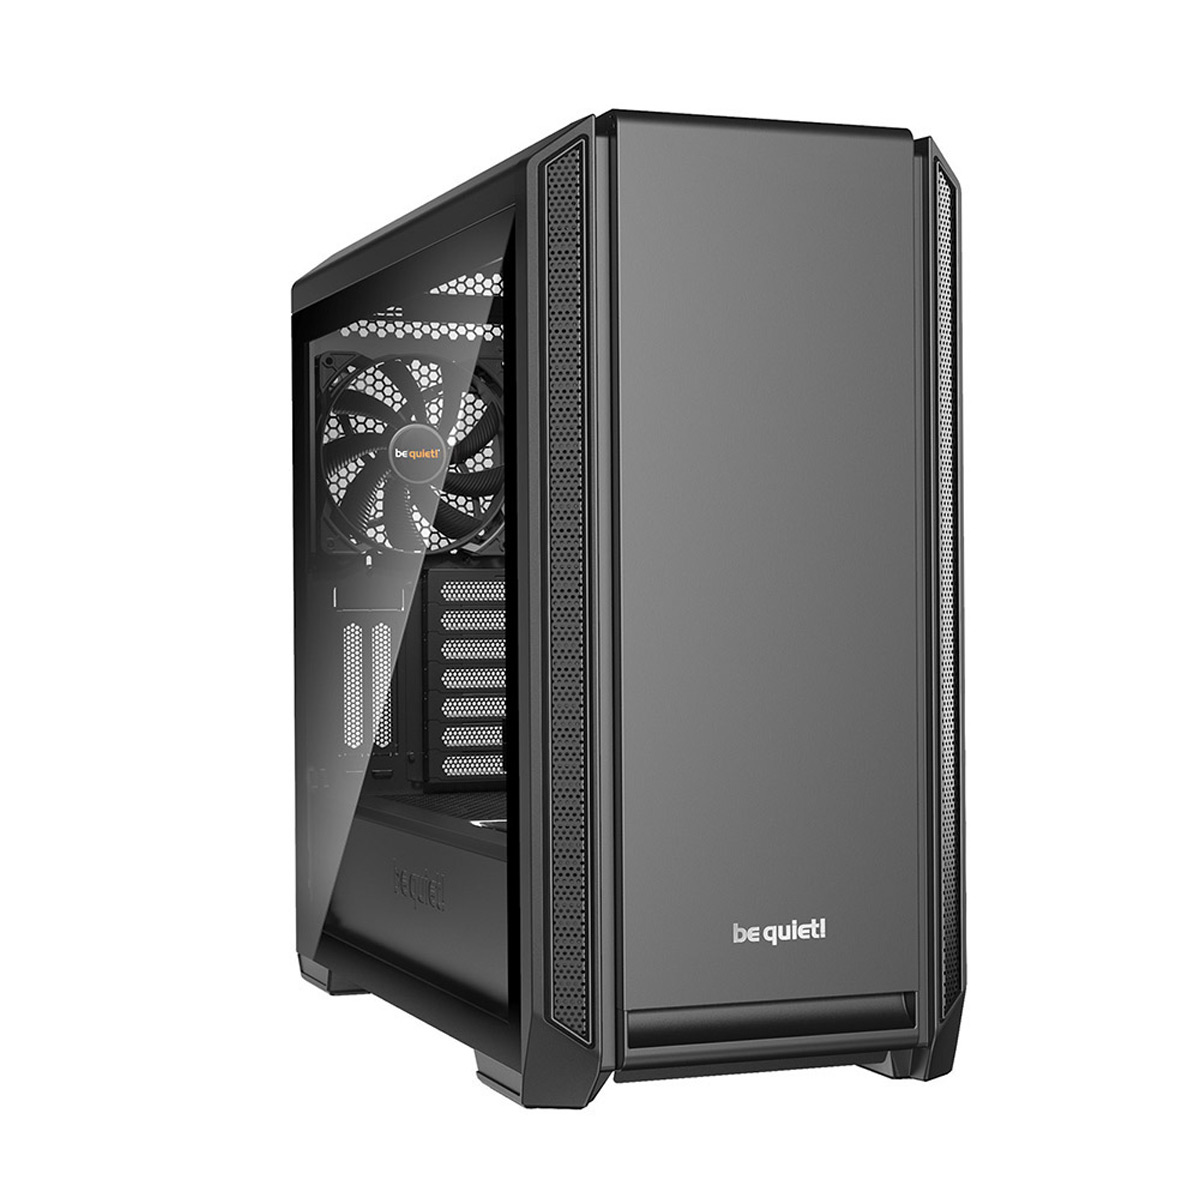 be quiet! Silent Base 601 Midi-Tower Case - Black Tempered Glass